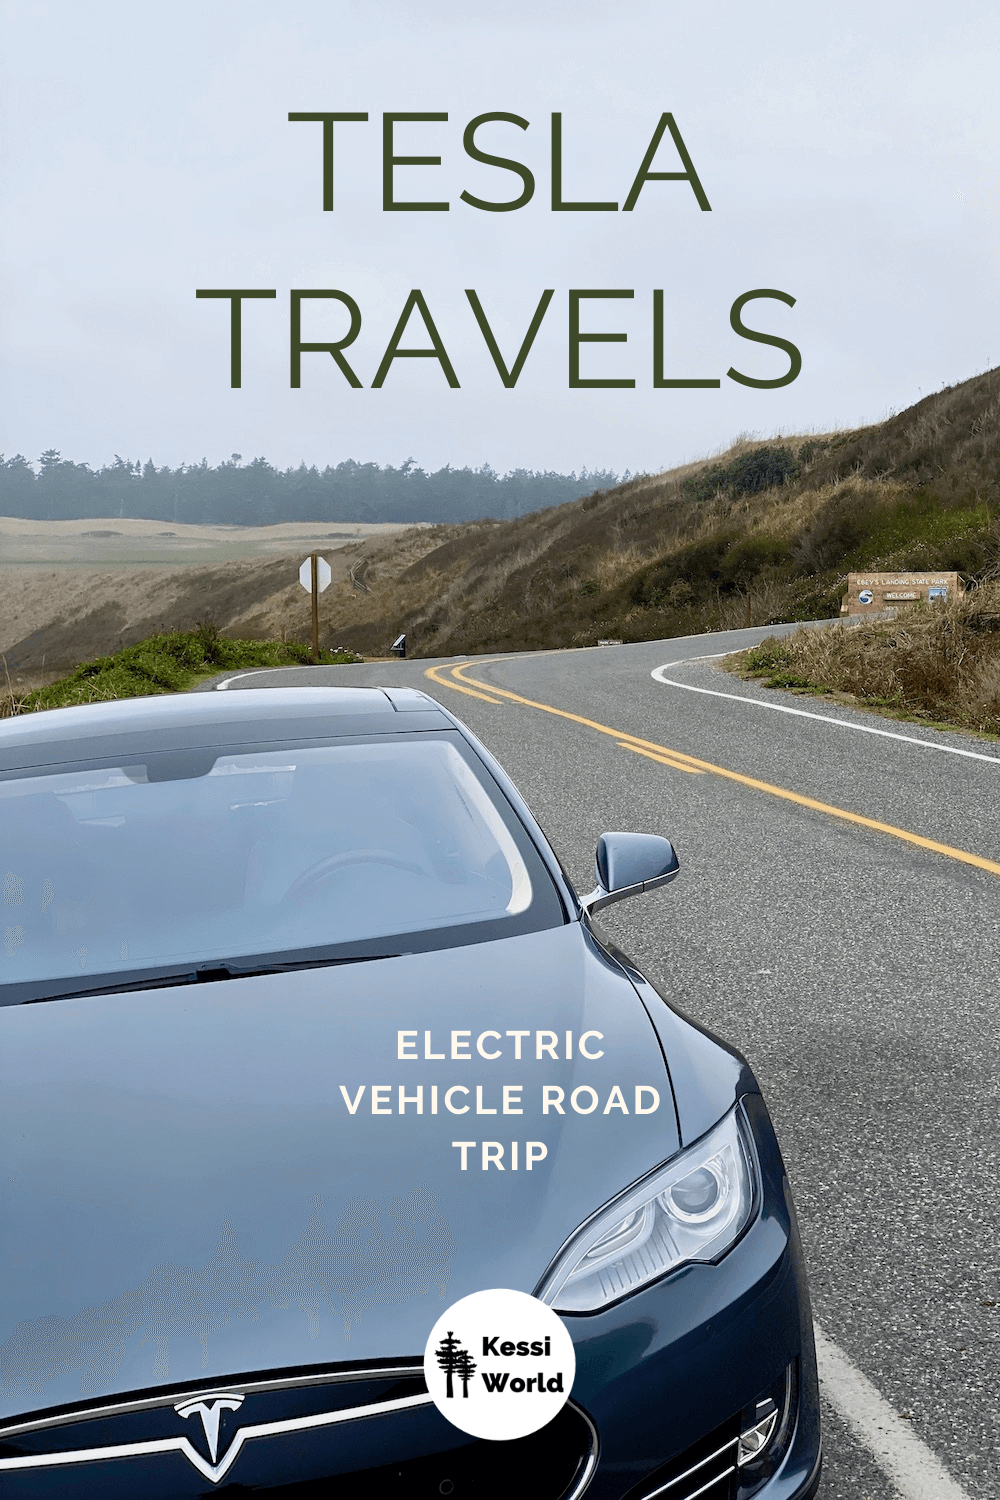 This Pinterest tile shows a Tesla model S series on a winding road with a yellow median line with backdrop of coastal hills. The steep banks have yellow and brown ocean grasses and the sky is a light blue. The vehicle is a metallic gray and the iconic Tesla hood ornament is prominent in the shot.